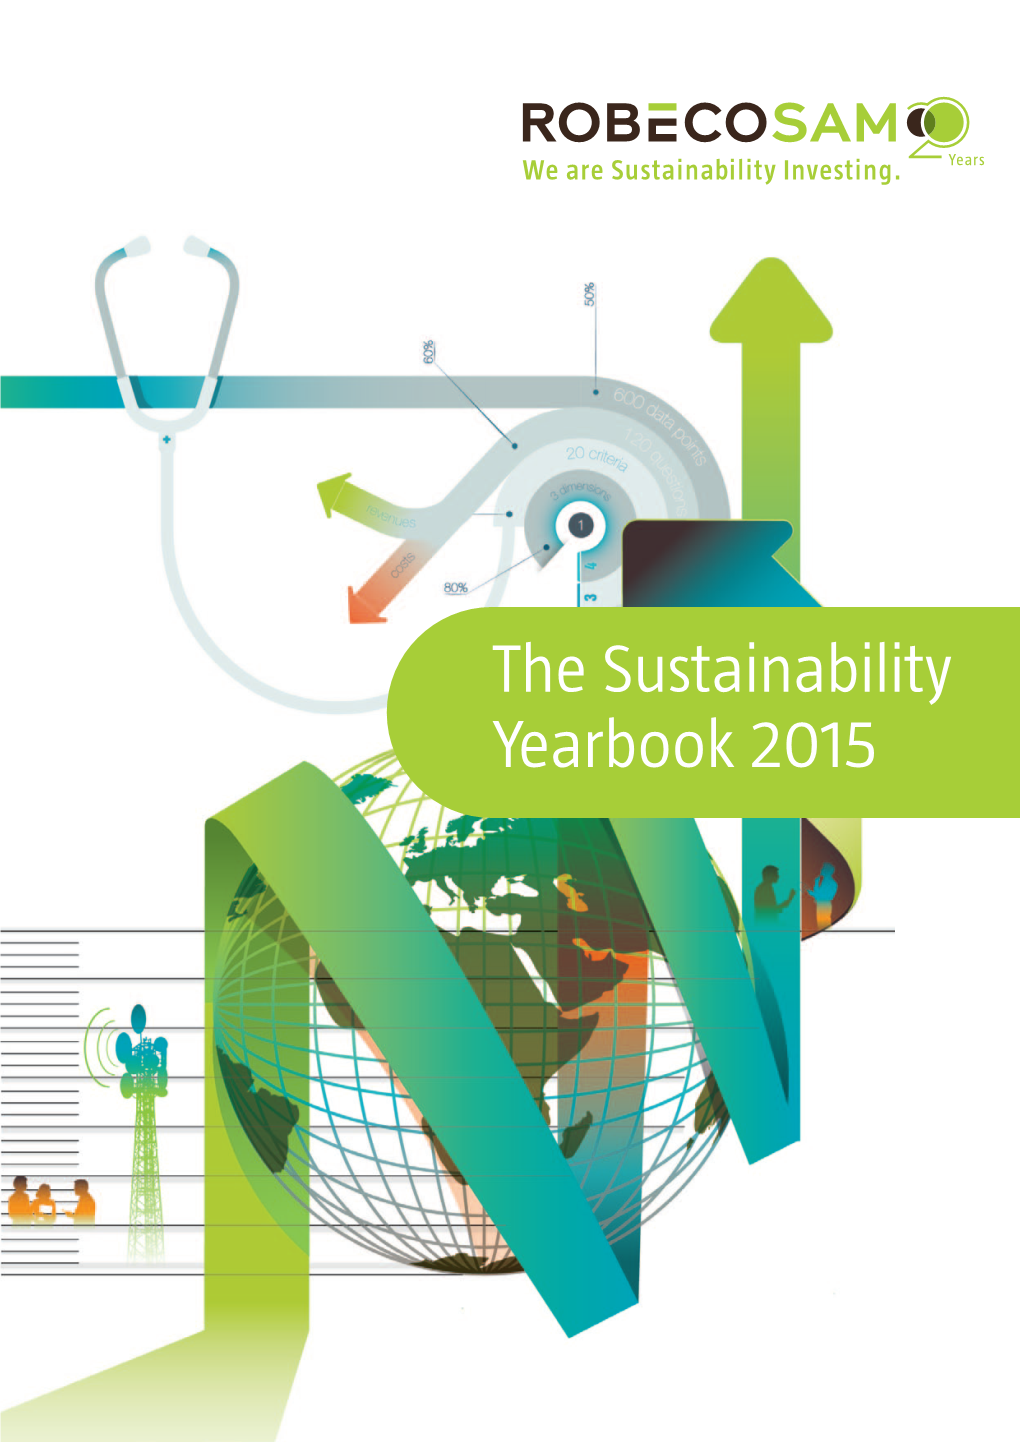 The Sustainability Yearbook 2015 the Sustainability Yearbook 2015